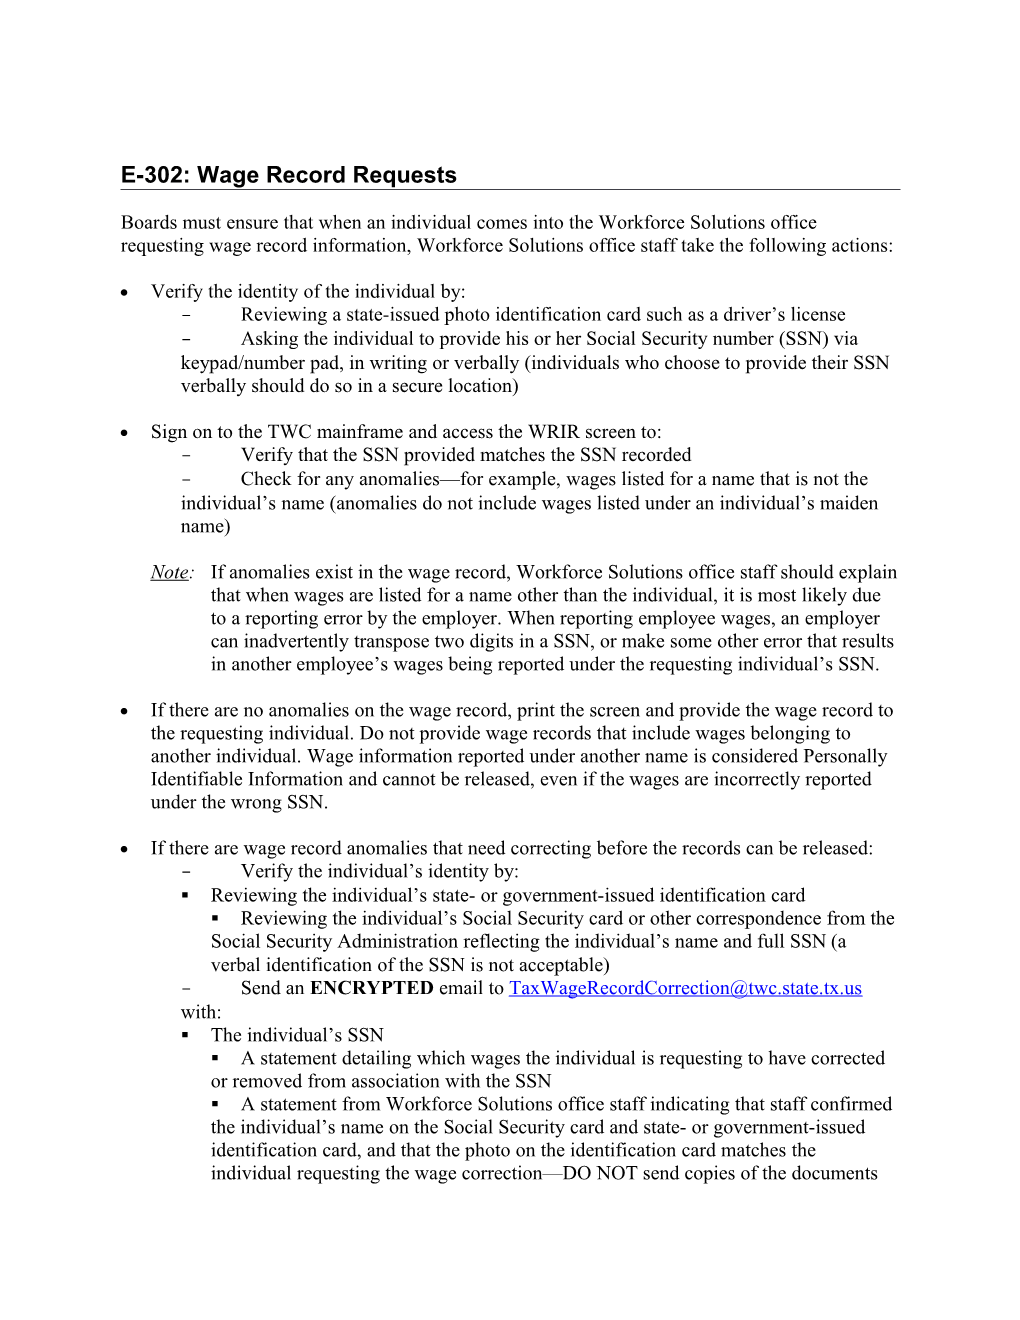 ES Guide Revision to E-302 Wage Record Requests